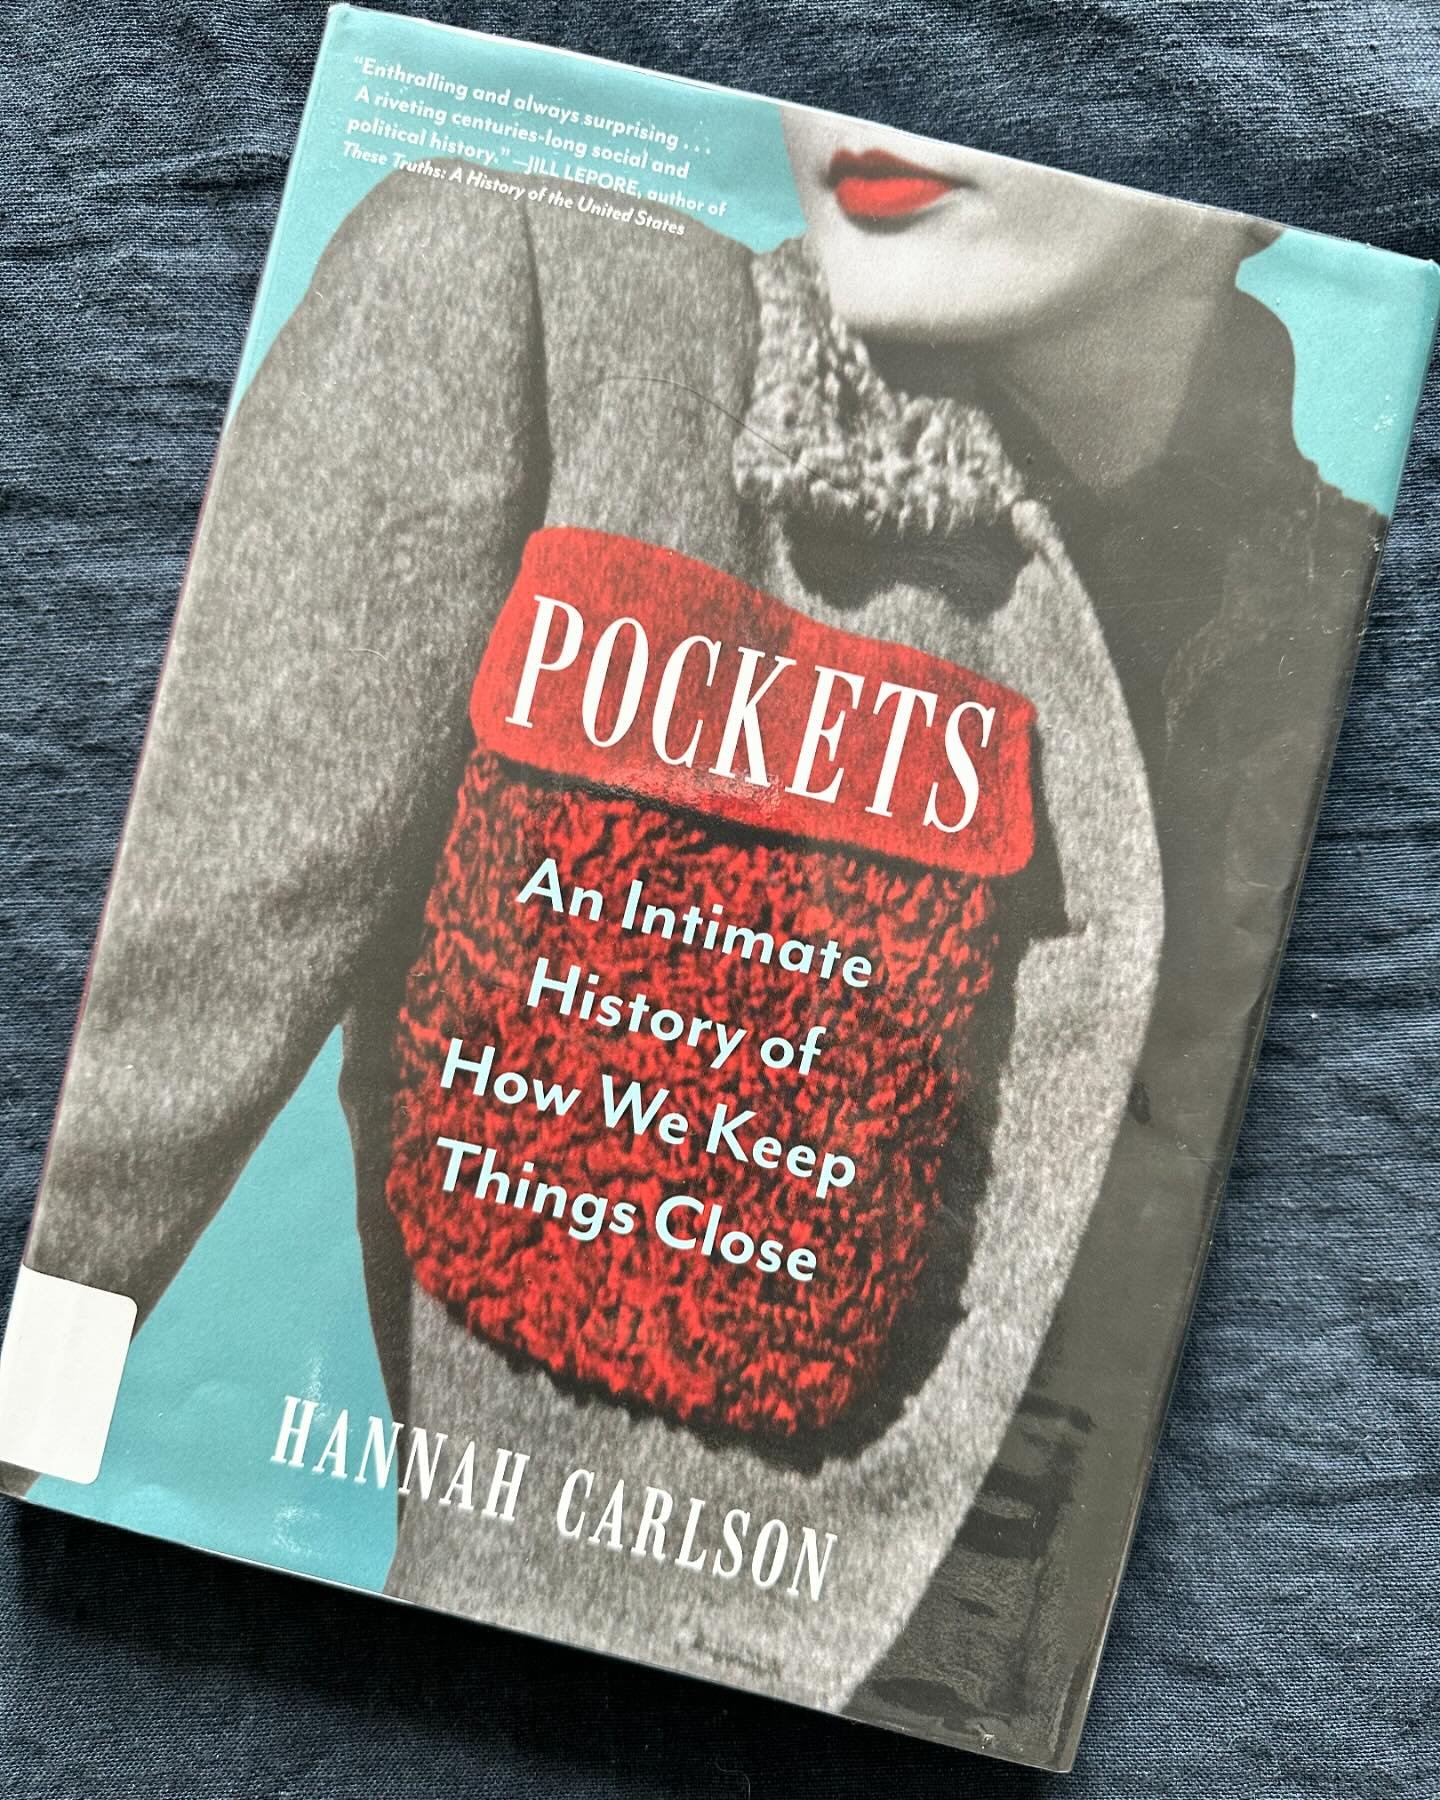 Book recommendation! Not just one for the fashion history geeks like me&hellip; this is a fascinating social history and I absolutely loved it. Pockets: An Intimate History of How We Keep Things Close by Hannah Carlson. 

Some people might think pock